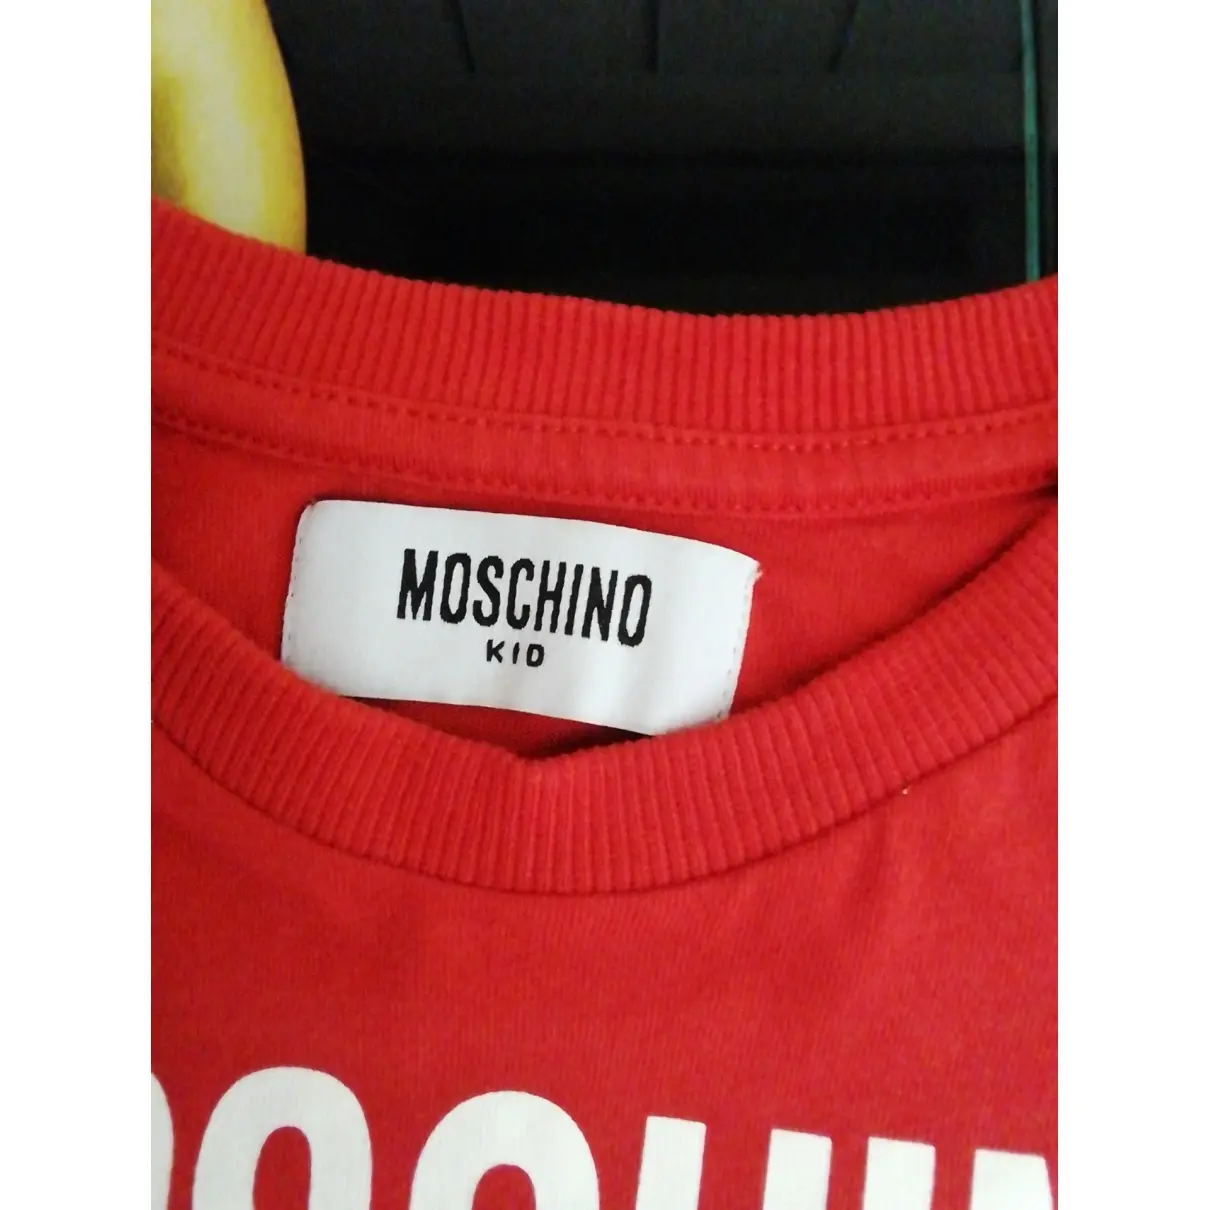 Buy Moschino Red Cotton Top online